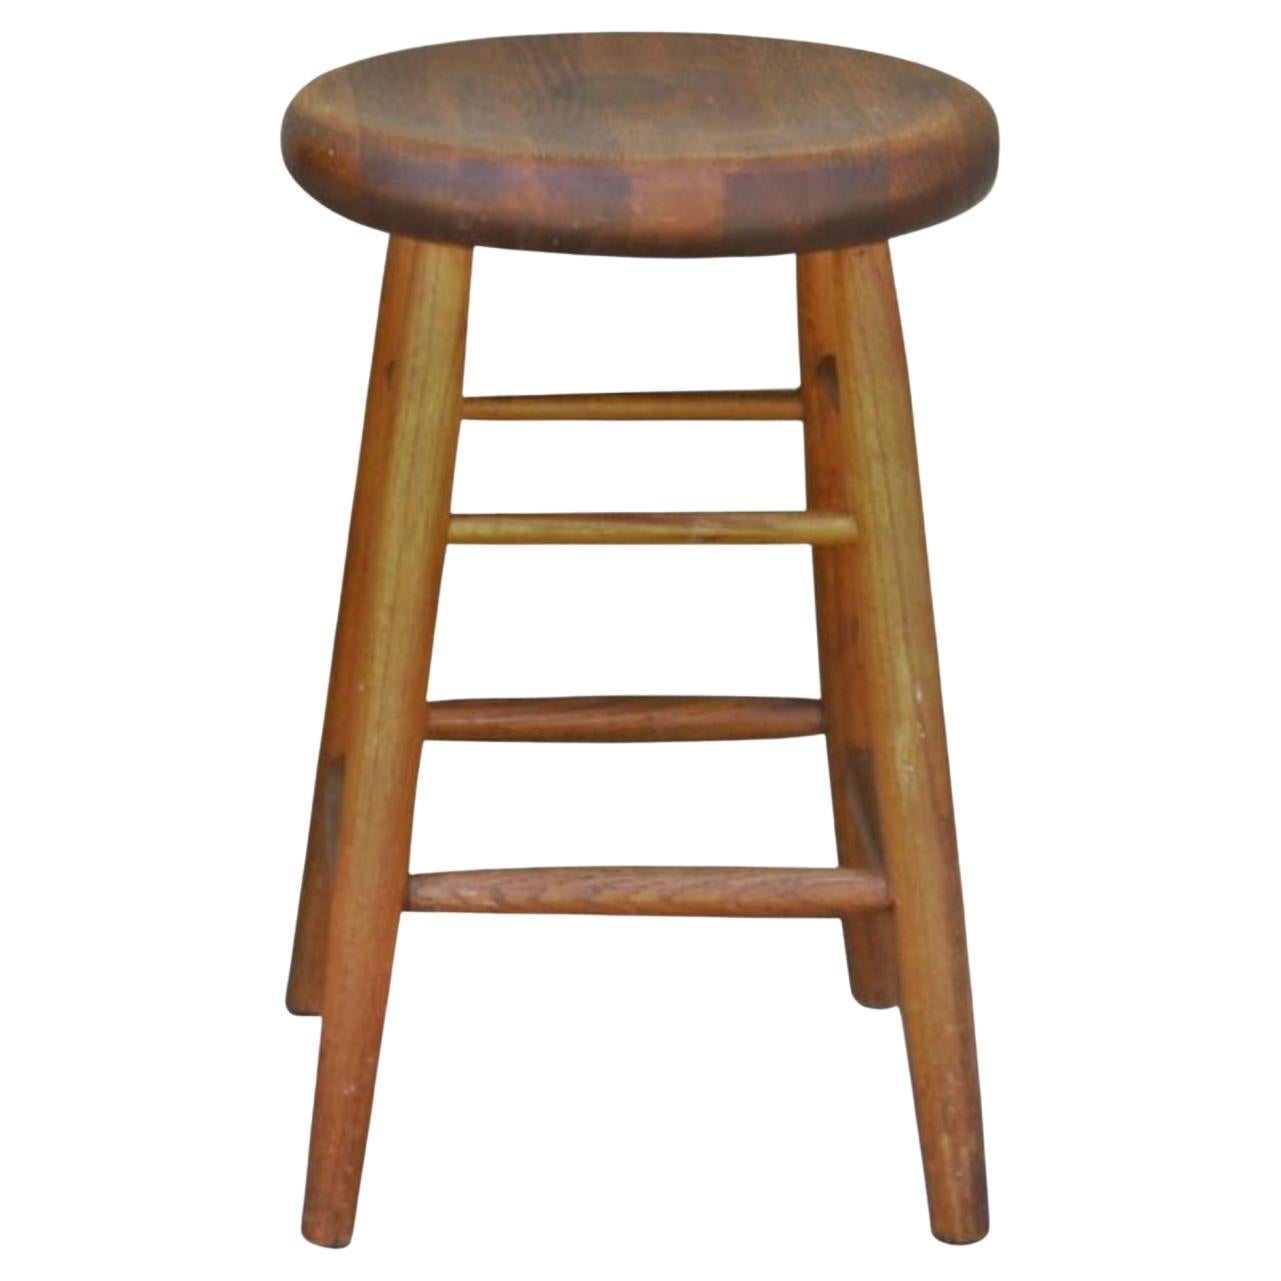 Early 20th Century Plank Seat Bar Stool For Sale